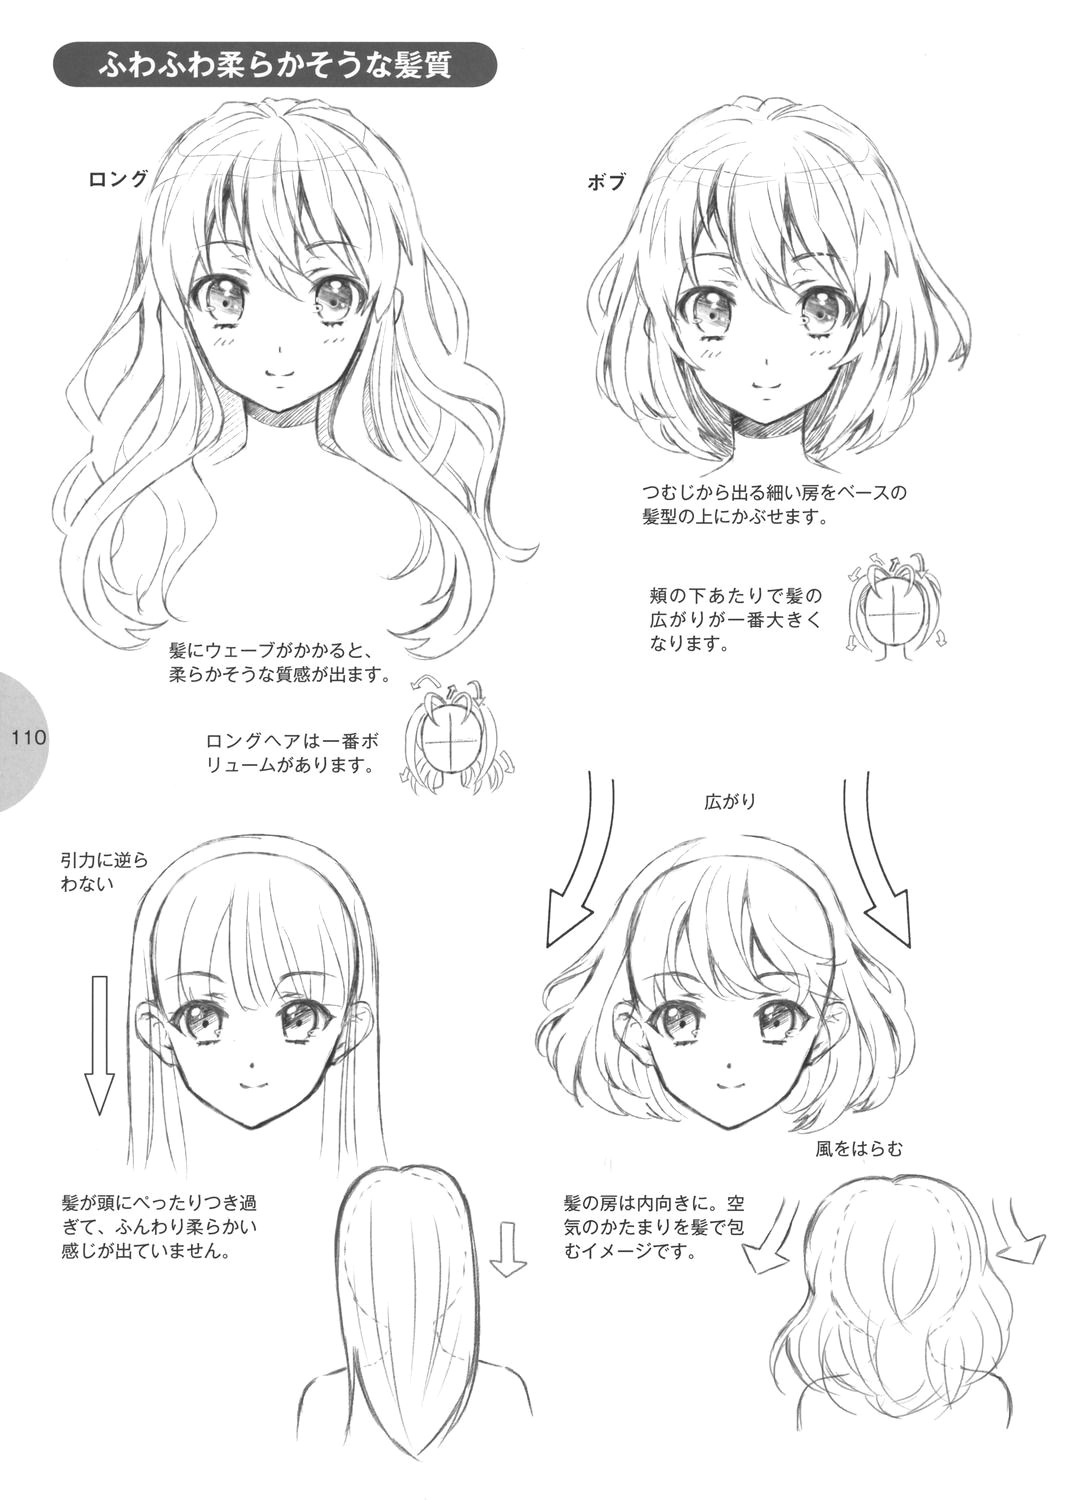 Best Way to Learn to Draw Anime Tutorial Hair Manga Hair How to Draw Hair Anime Hair